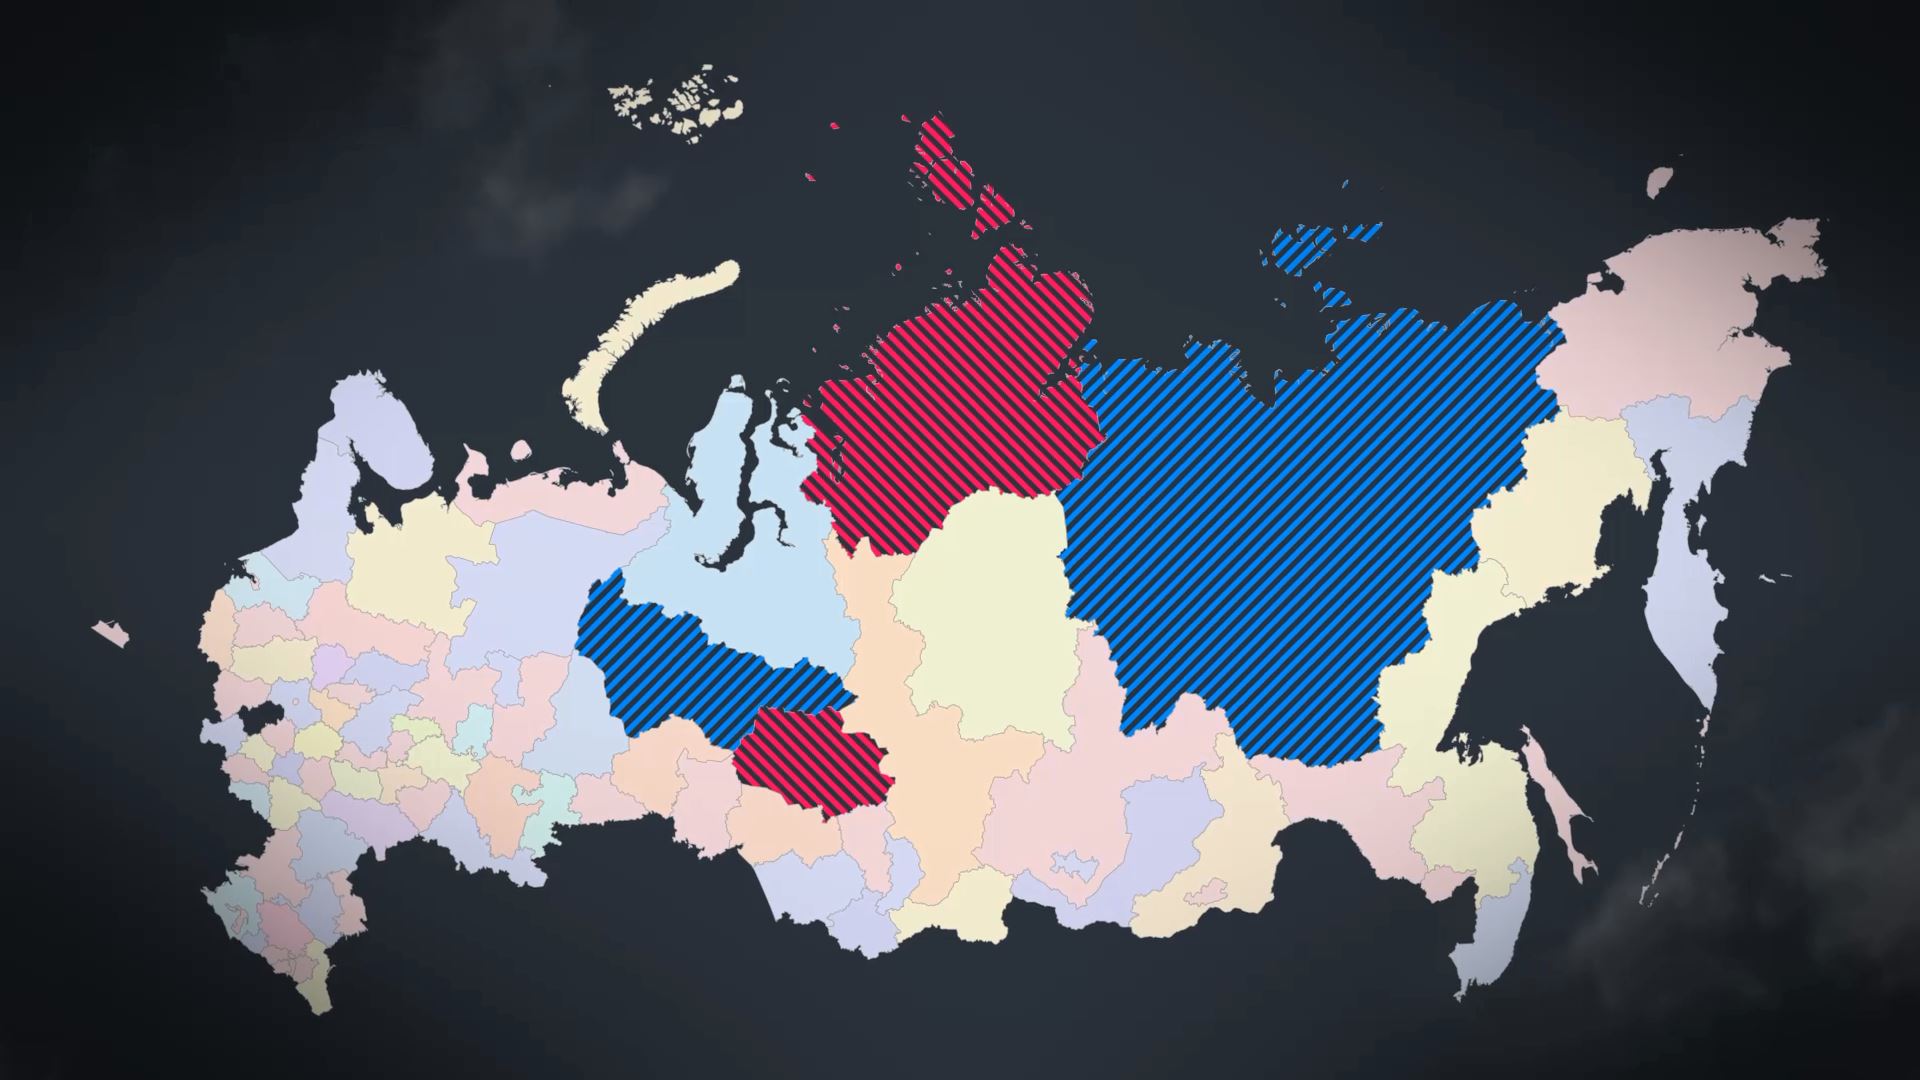  Russia Map - Russian Federation Map Kit 